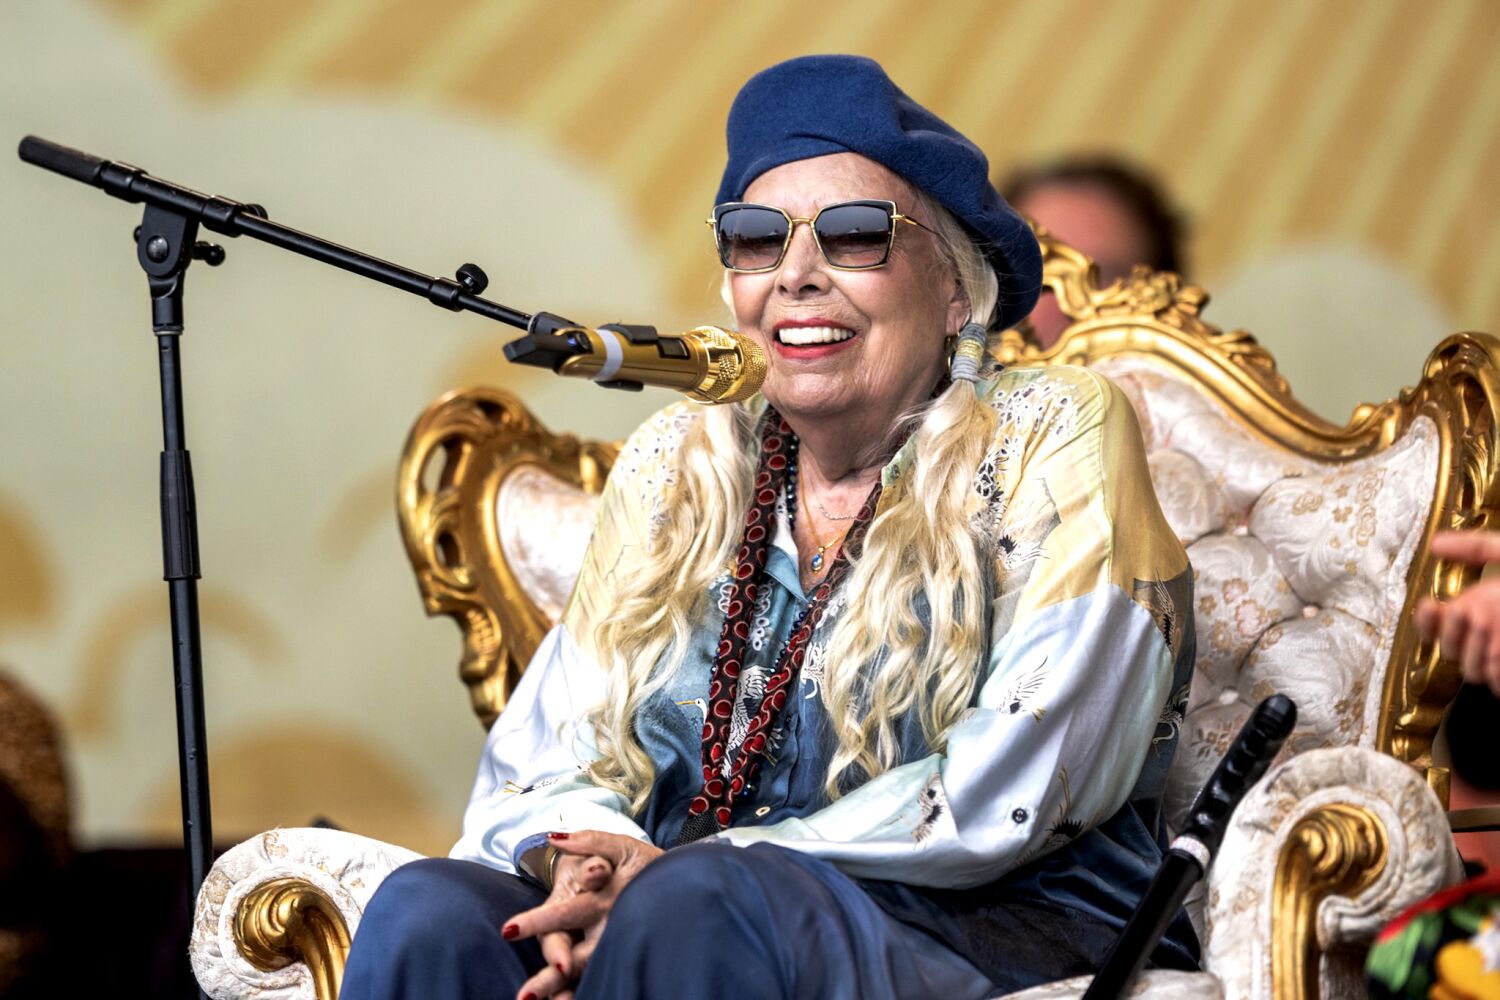 Joni Mitchell takes the stage at the Gorge: Live updates